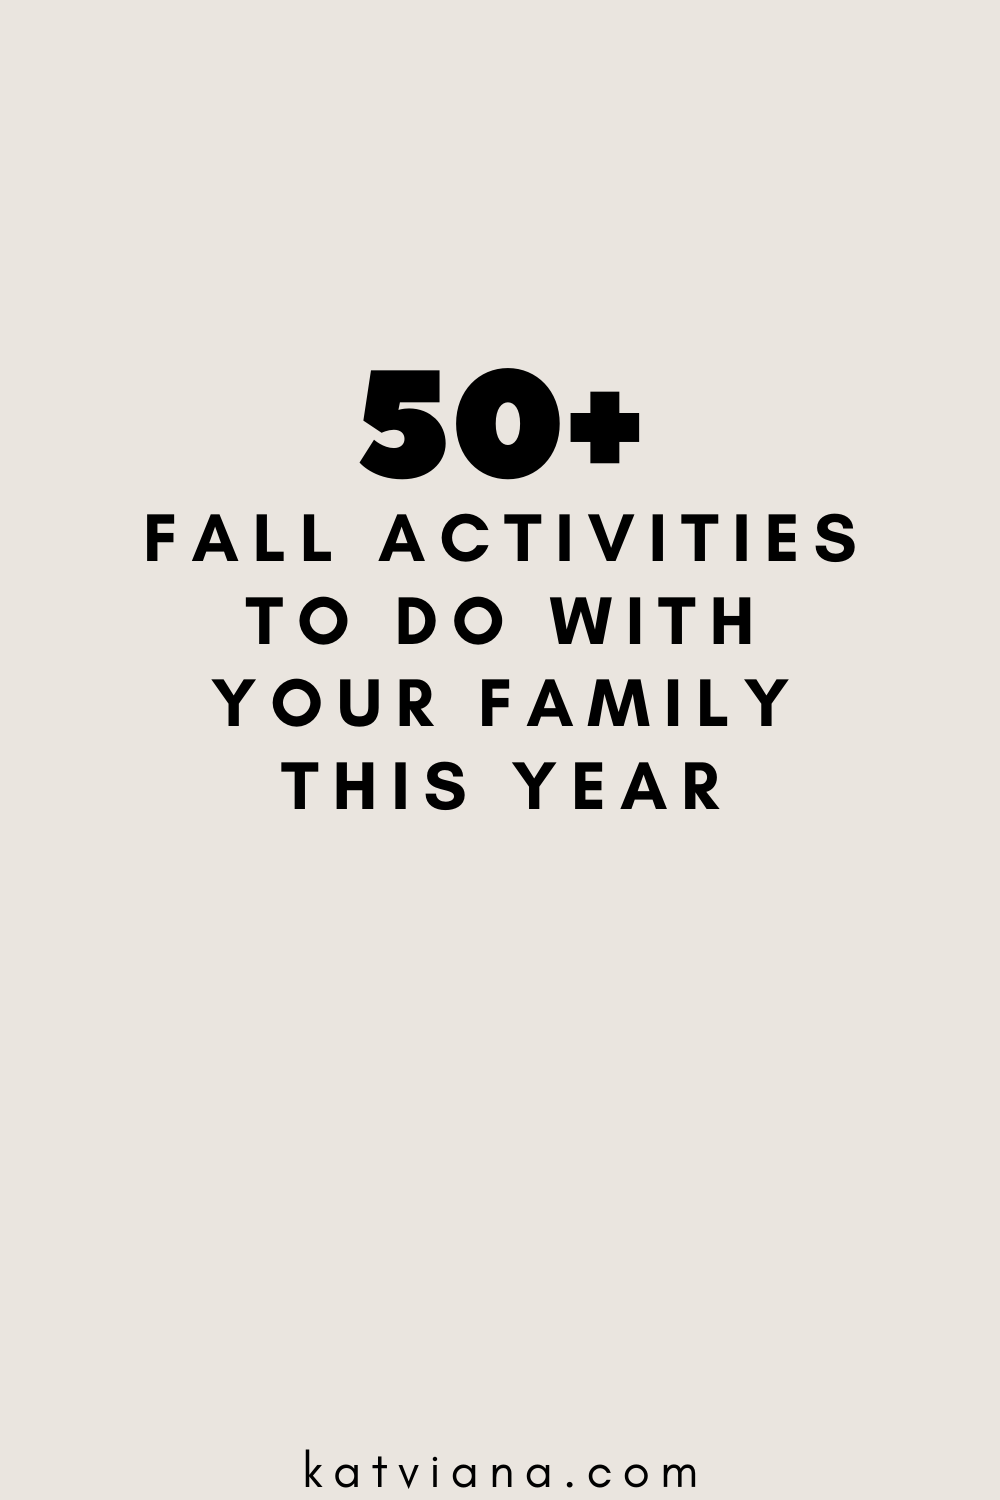 50+ Fall Activities To Do With Your Family This Year | Kat Viana